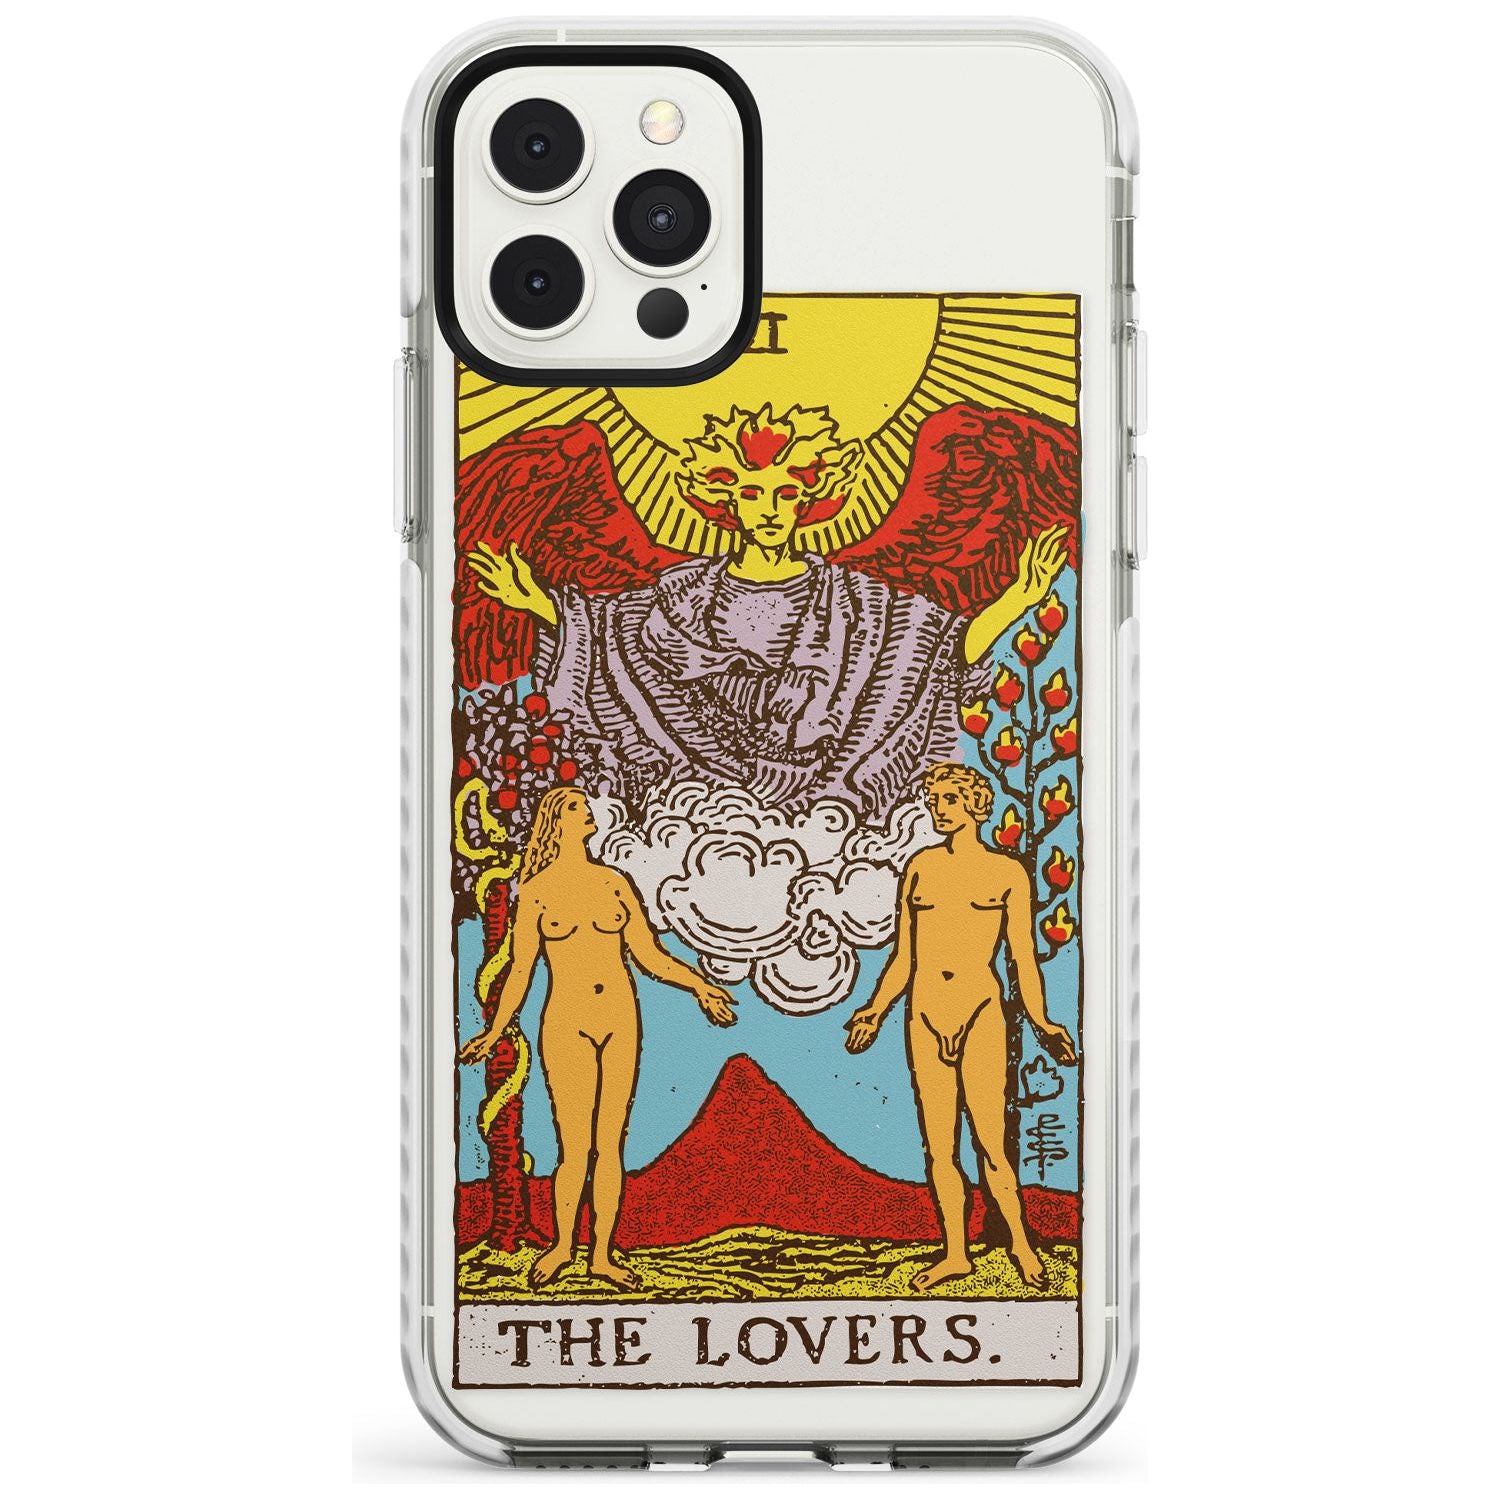 The Lovers Tarot Card - Colour Slim TPU Phone Case for iPhone 11 Pro Max